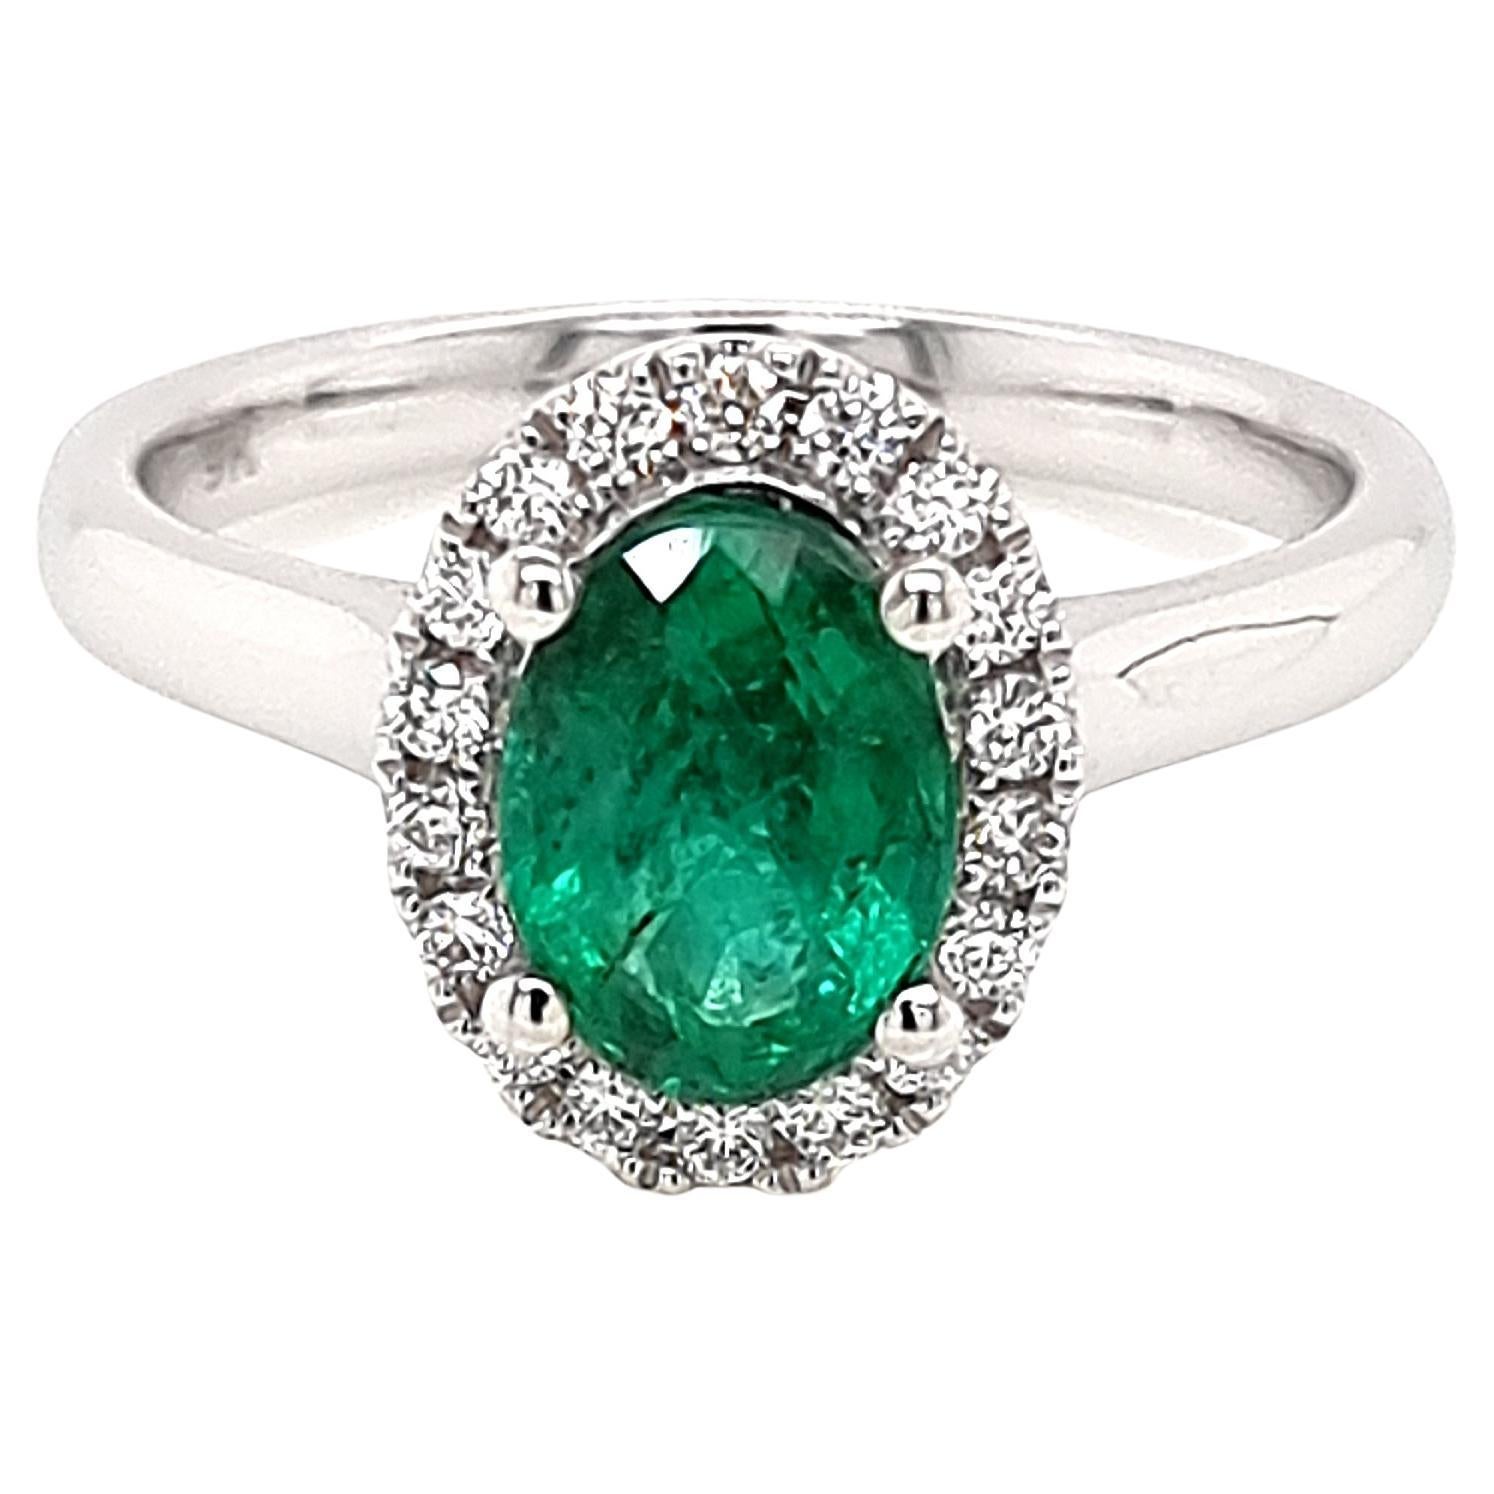 Zambian Emerald Halo Ring with White Diamonds made in 9K White Gold